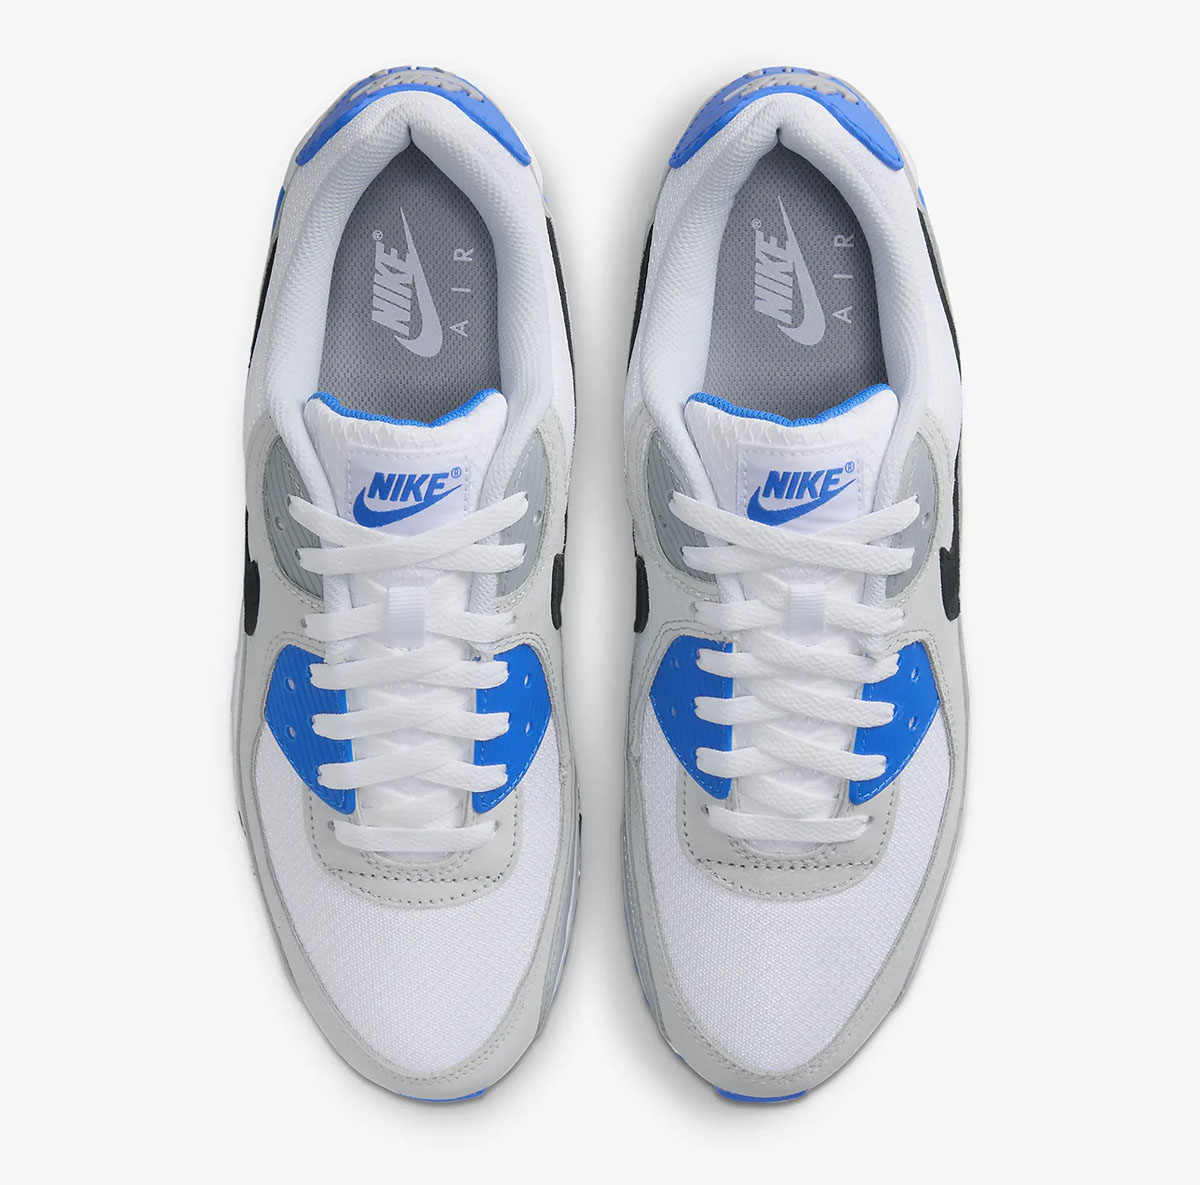 buy nike boots online coupon for women shoes White Photo Blue 4